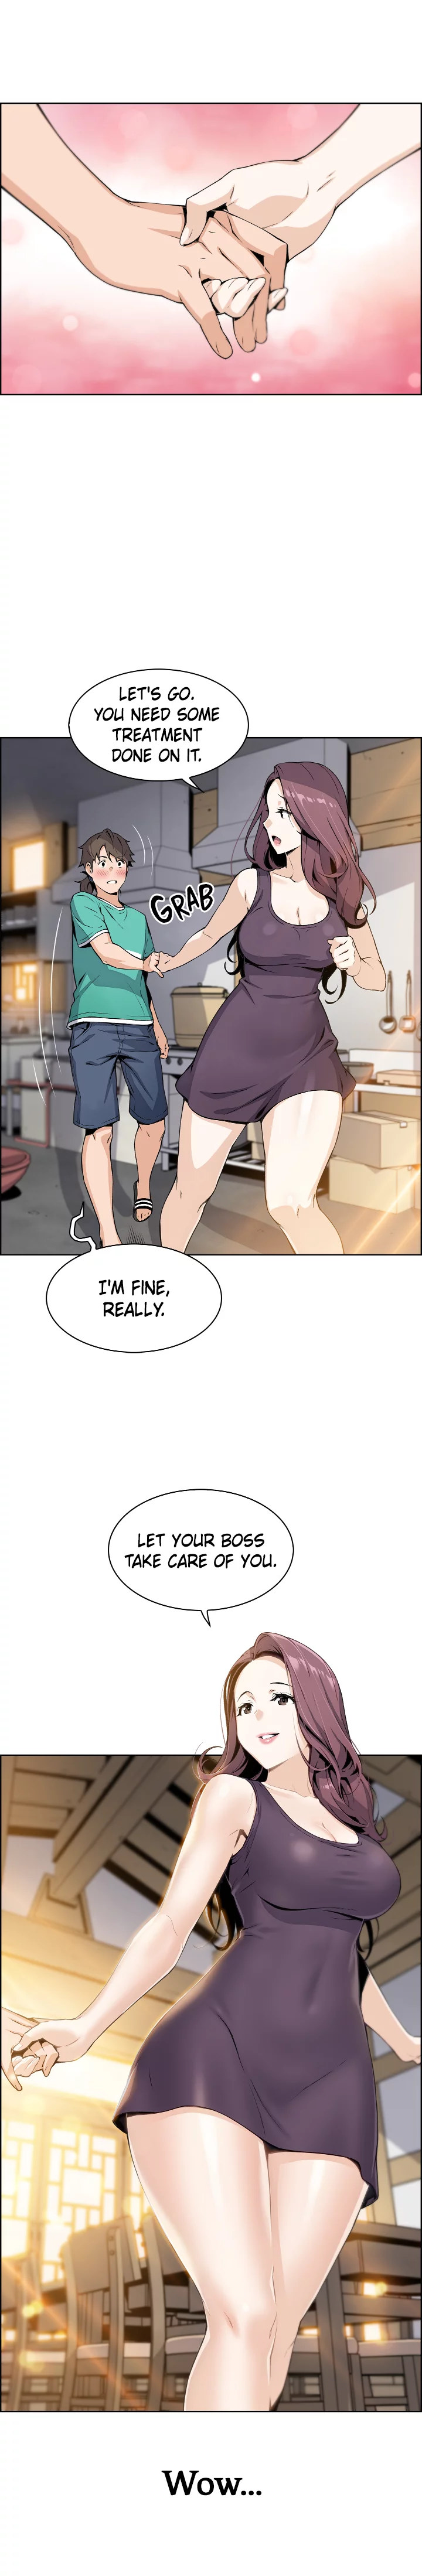 Tofu Shop Beauties - Chapter 1 Page 6